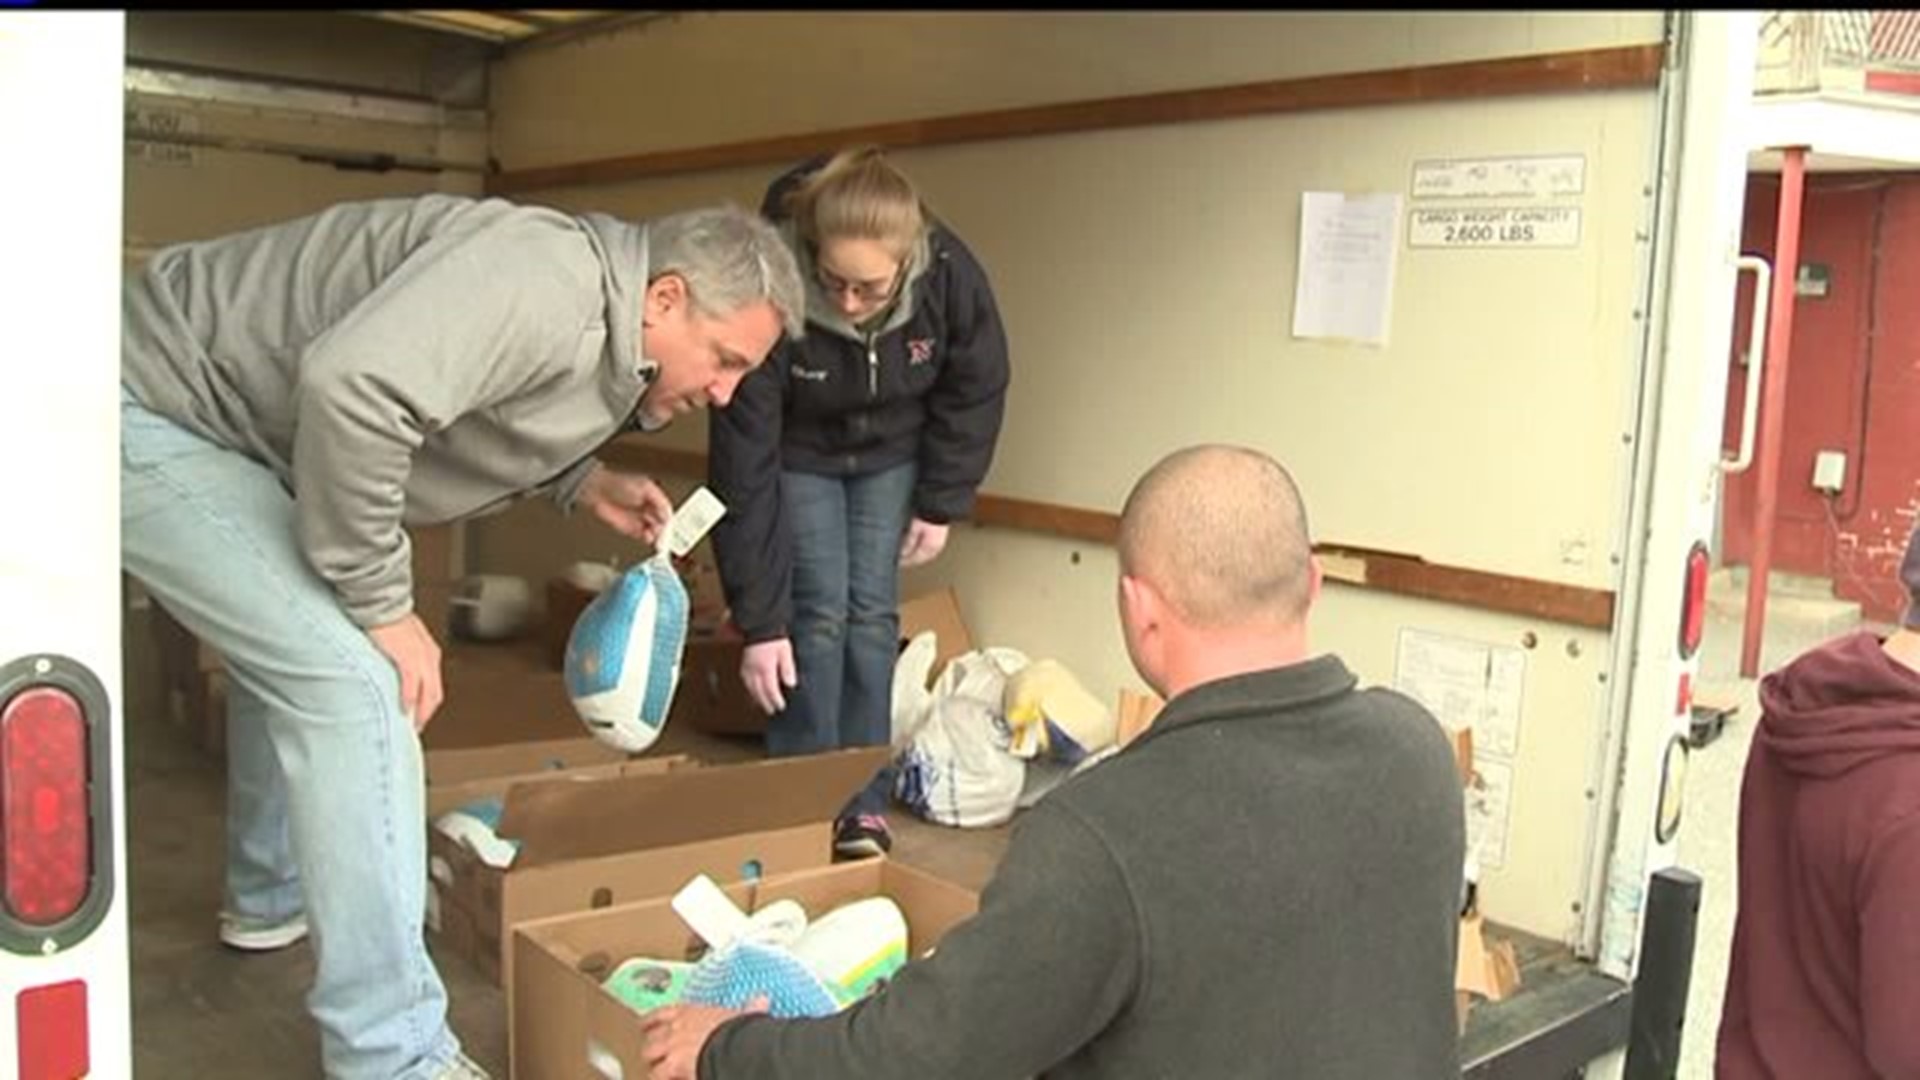 Food pantry gives hundreds of families Thanksgiving dinner